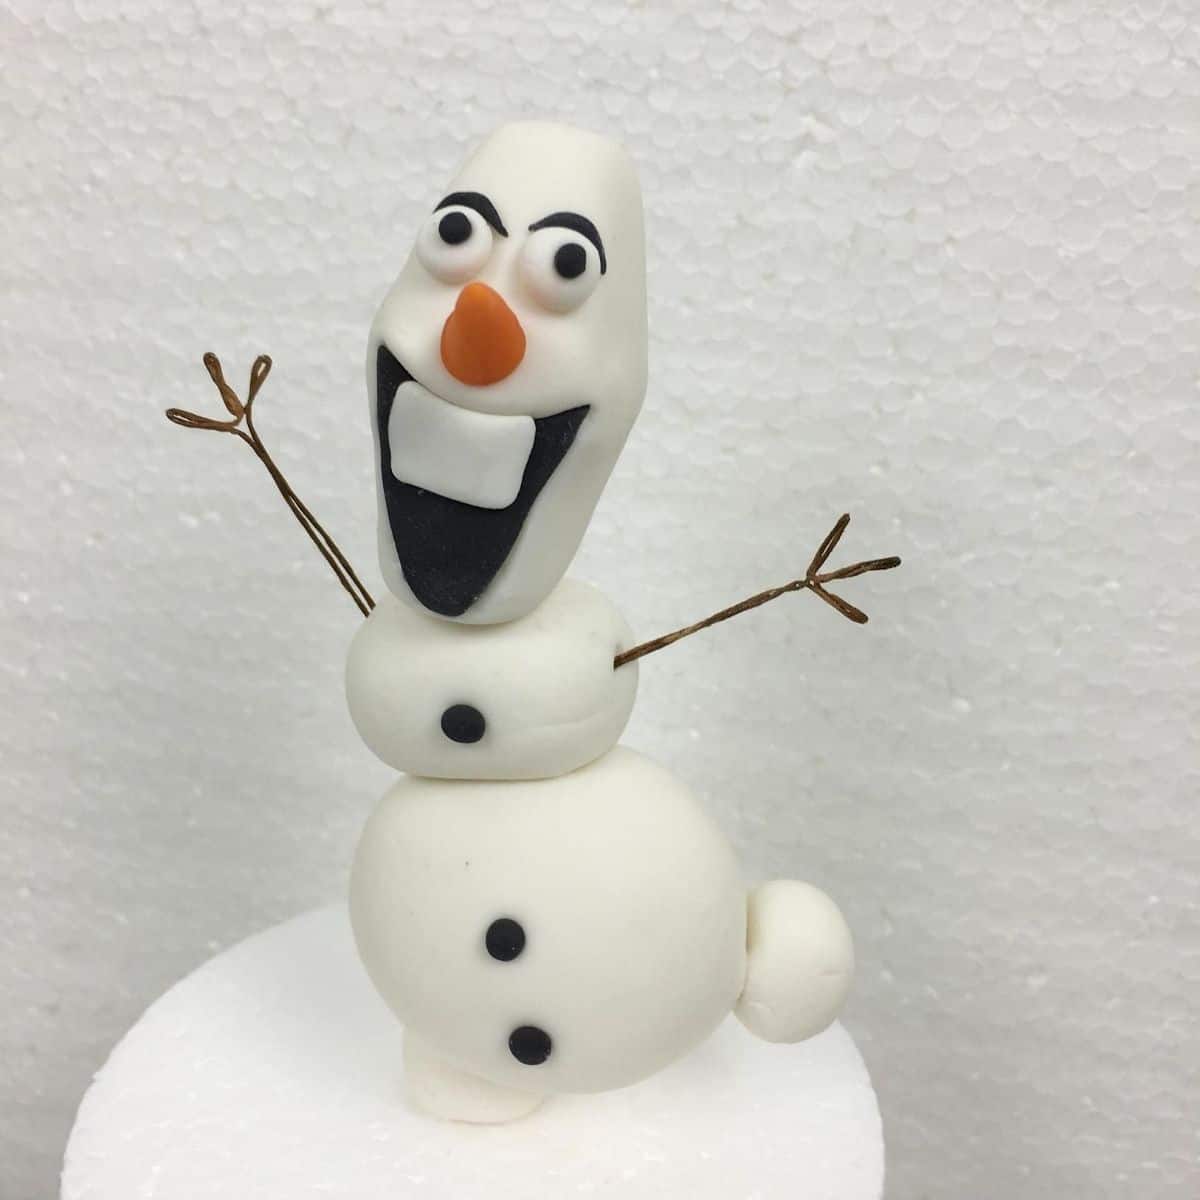 3D Olaf cake topper with its arms stretched out